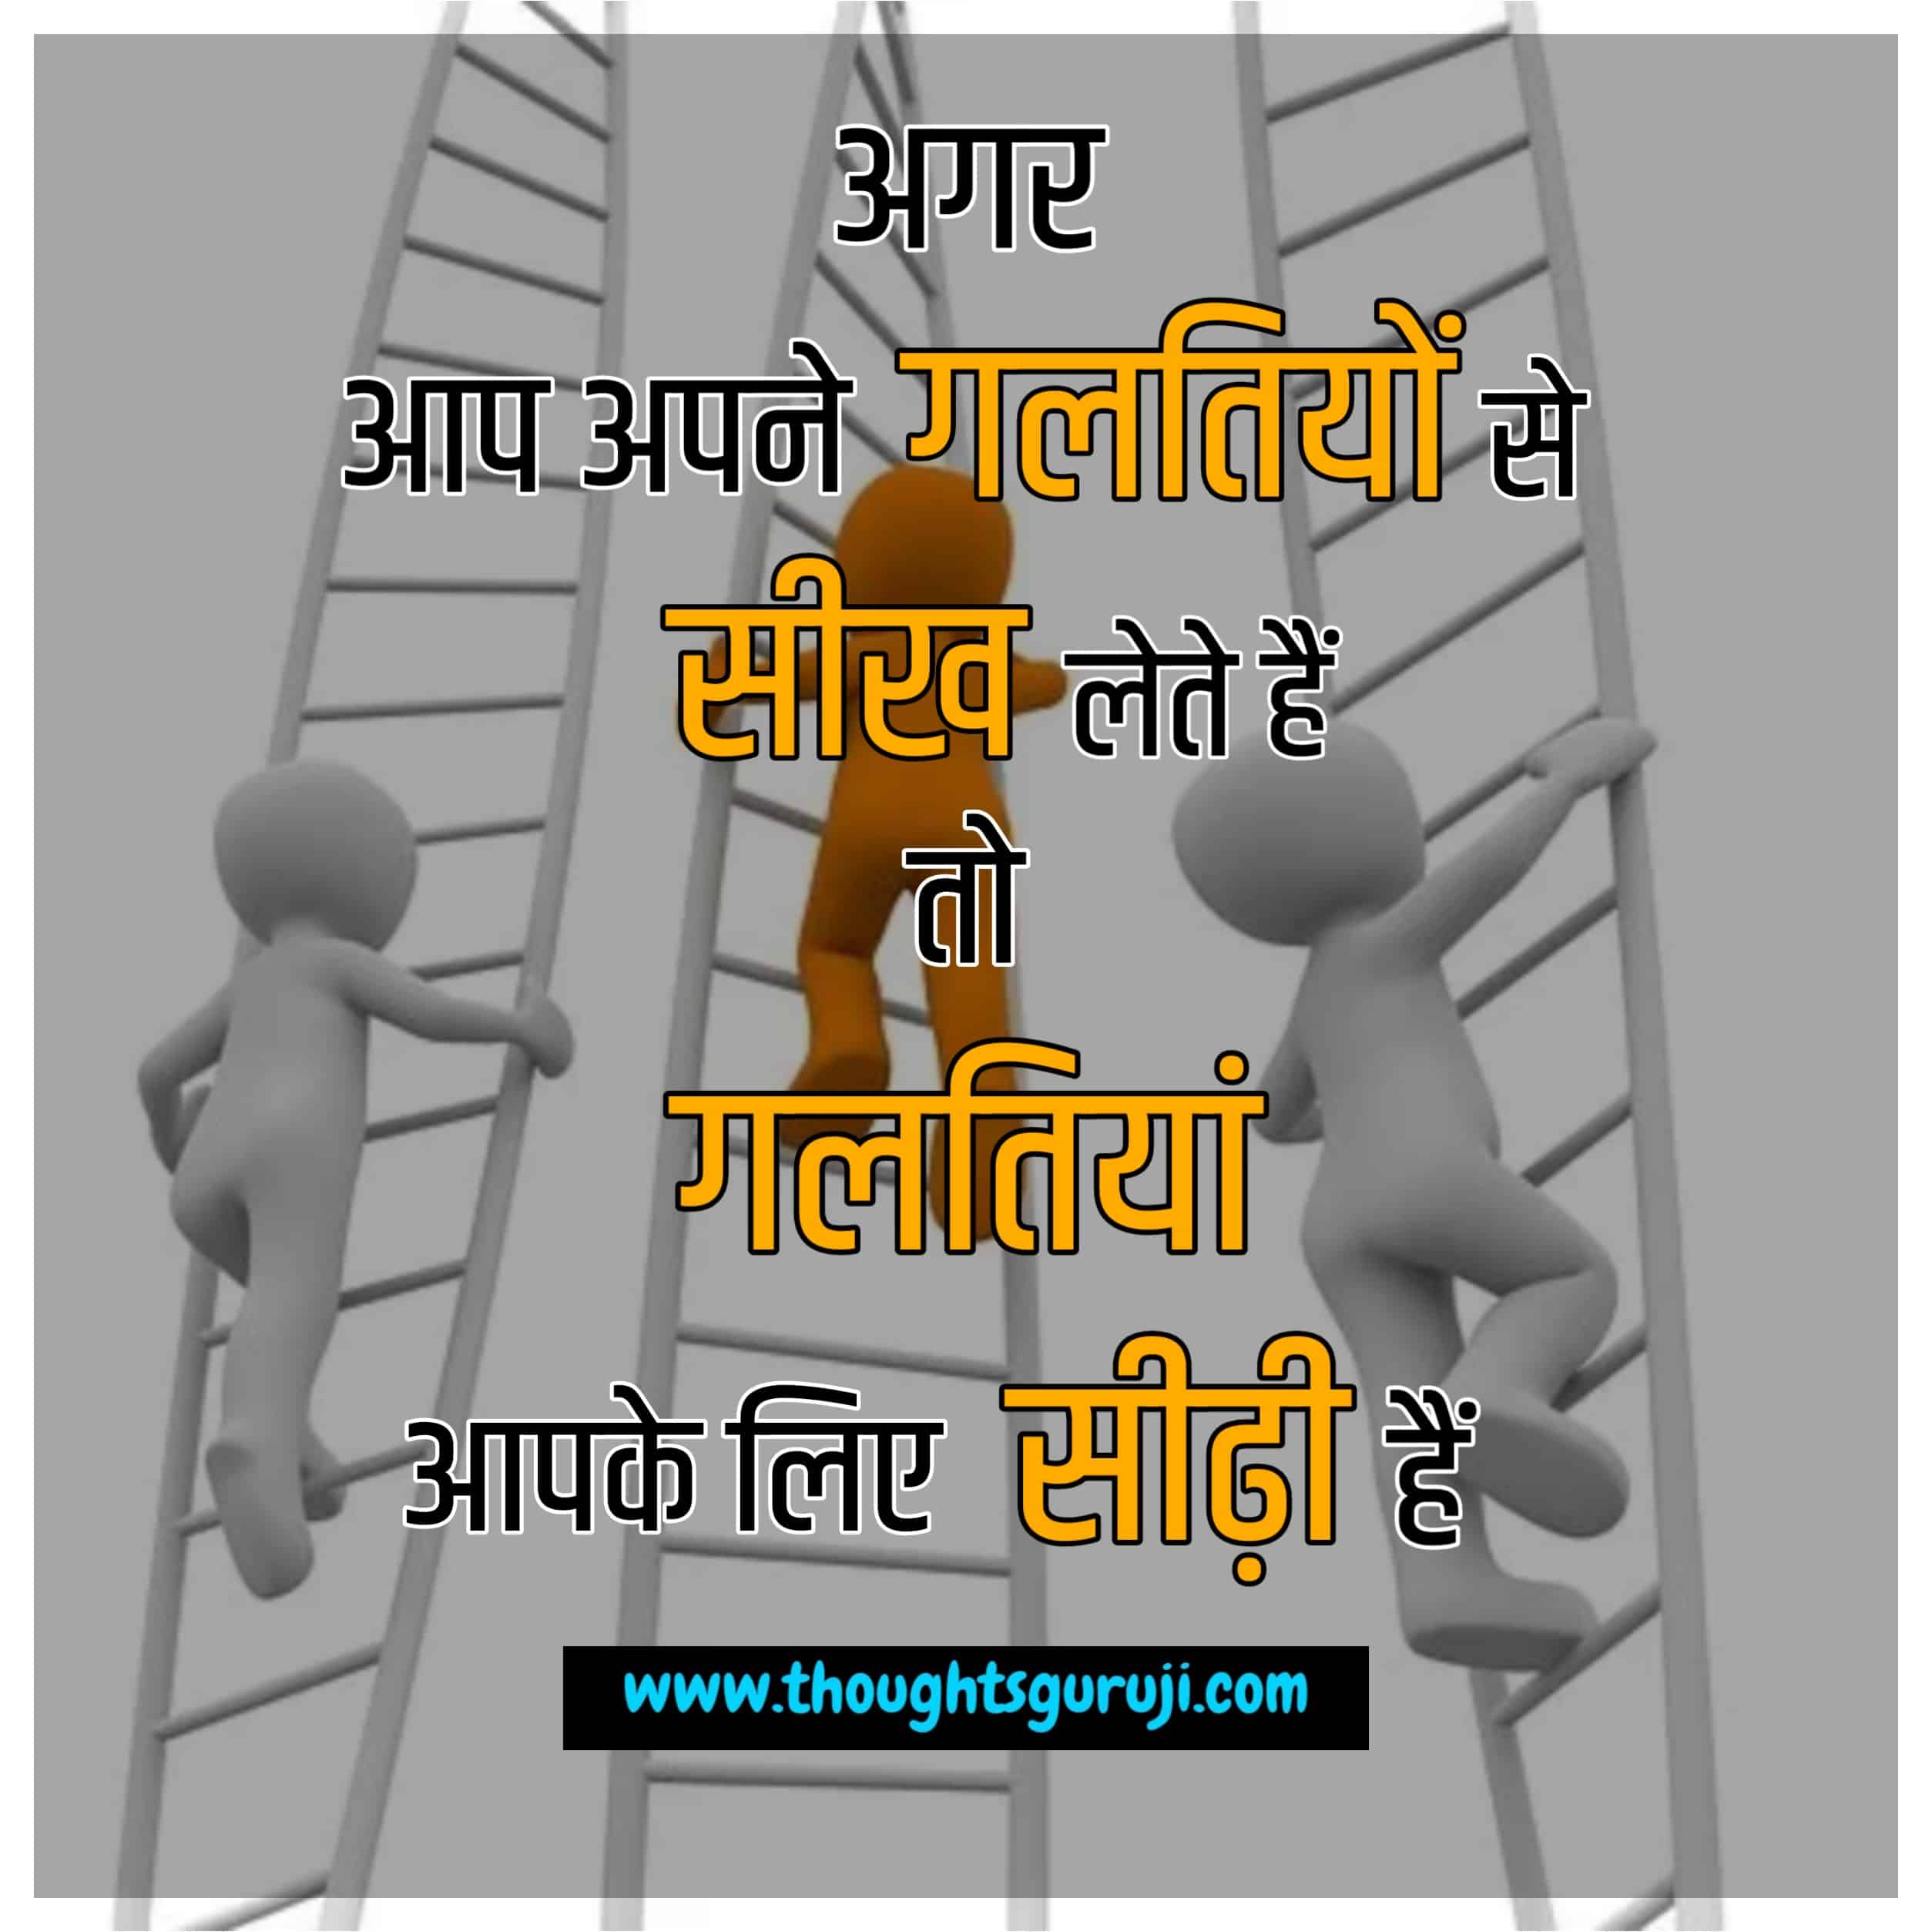 Motivational Quotes In Hindi For Students À¤® À¤ À¤µ À¤¶à¤¨à¤² À¤ À¤ À¤¸ À¤« À¤° À¤¸ À¤ À¤¡ À¤ À¤¸